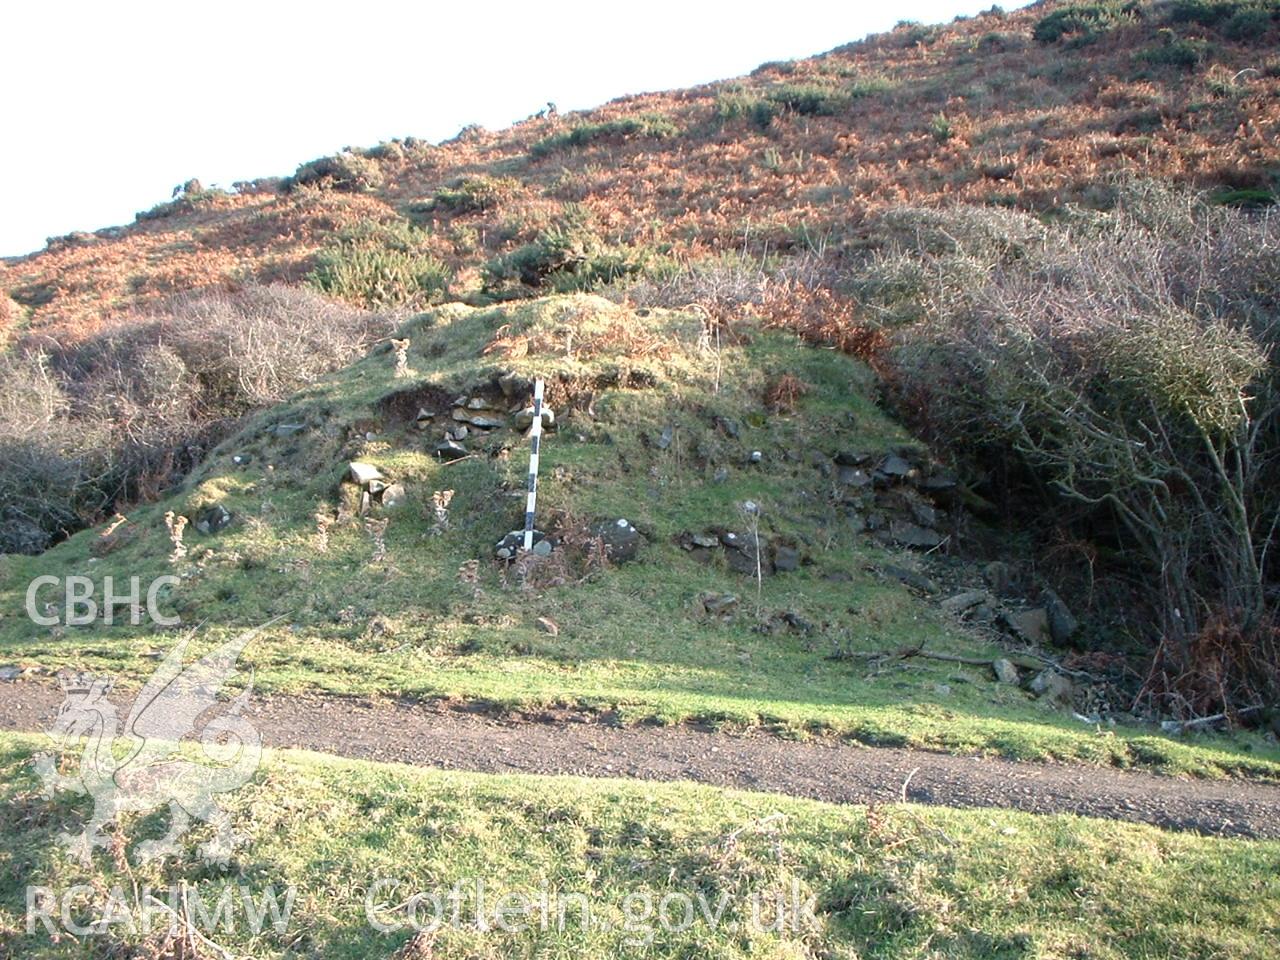 Digital colour photograph showing a Lime Kiln at Gwadn, NTSMR number 81931. Taken from a National Trust archaeological survey report on St Elvis, Pointz Castle, Solva to Cwmbach, South Wales, produced by Salvatore Garfi, 2004.